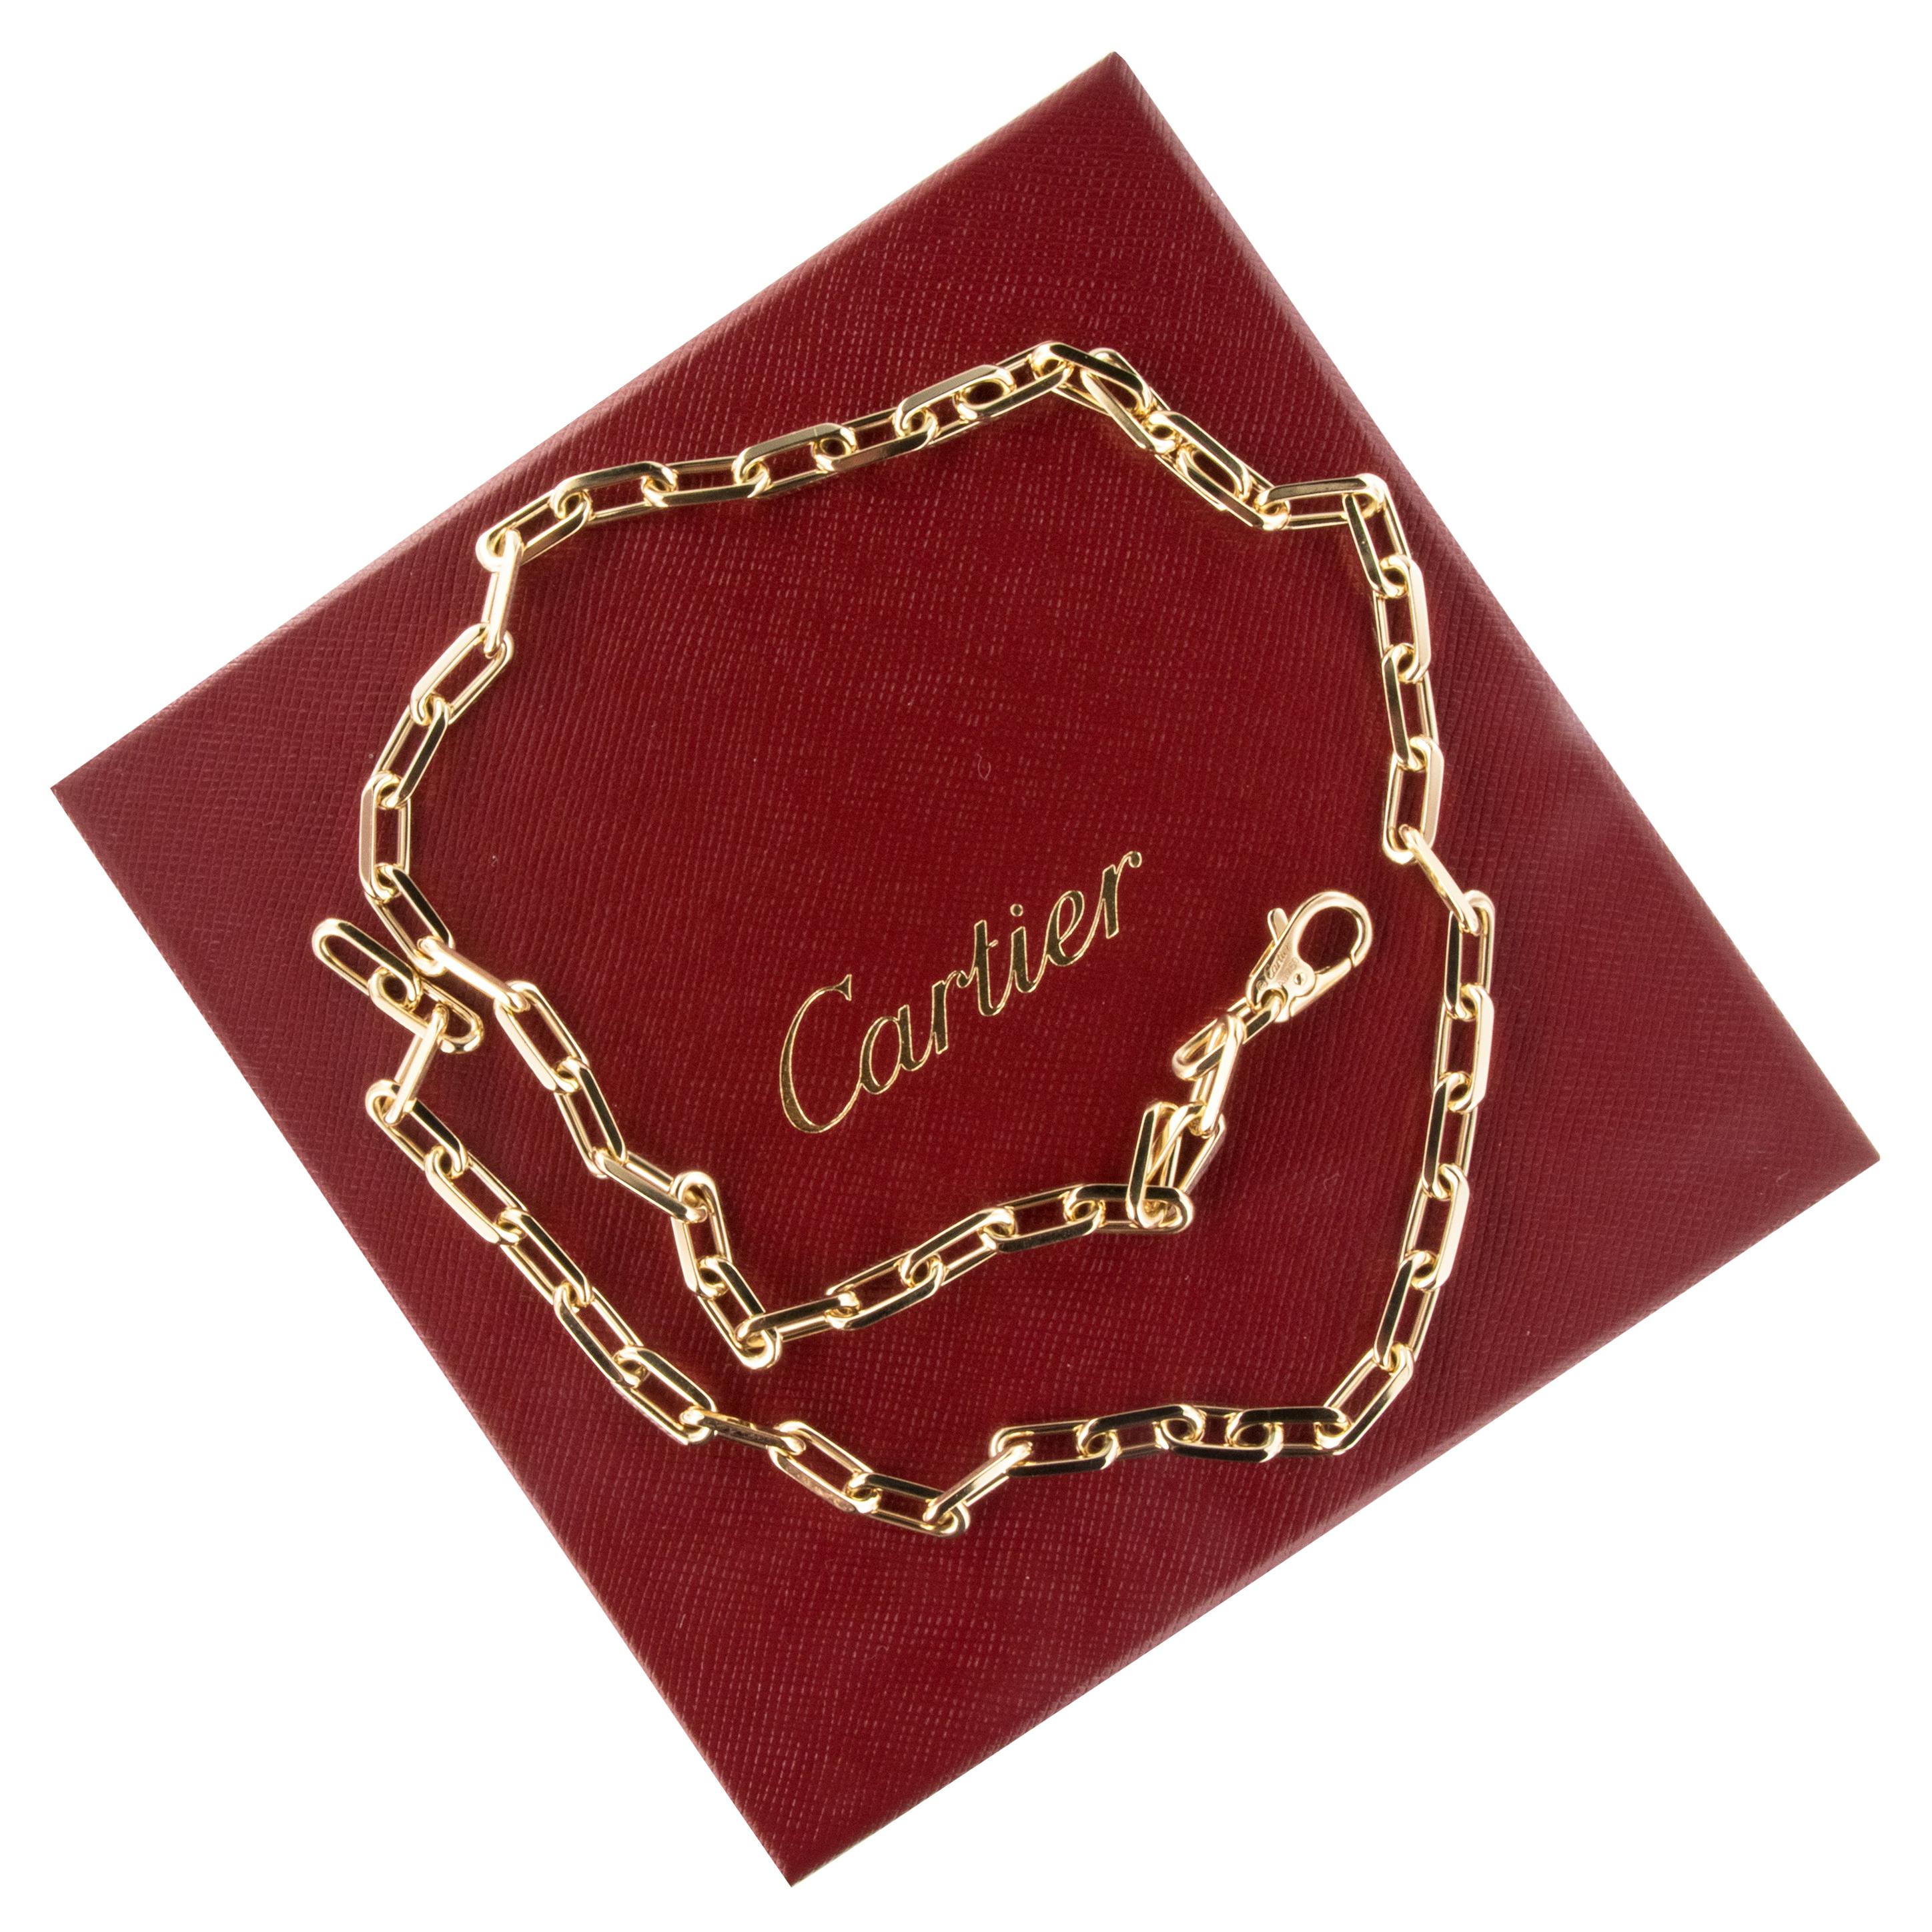 18 Karat Yellow Gold Cartier Santos-Dumont Chain Necklace with Box & Papers